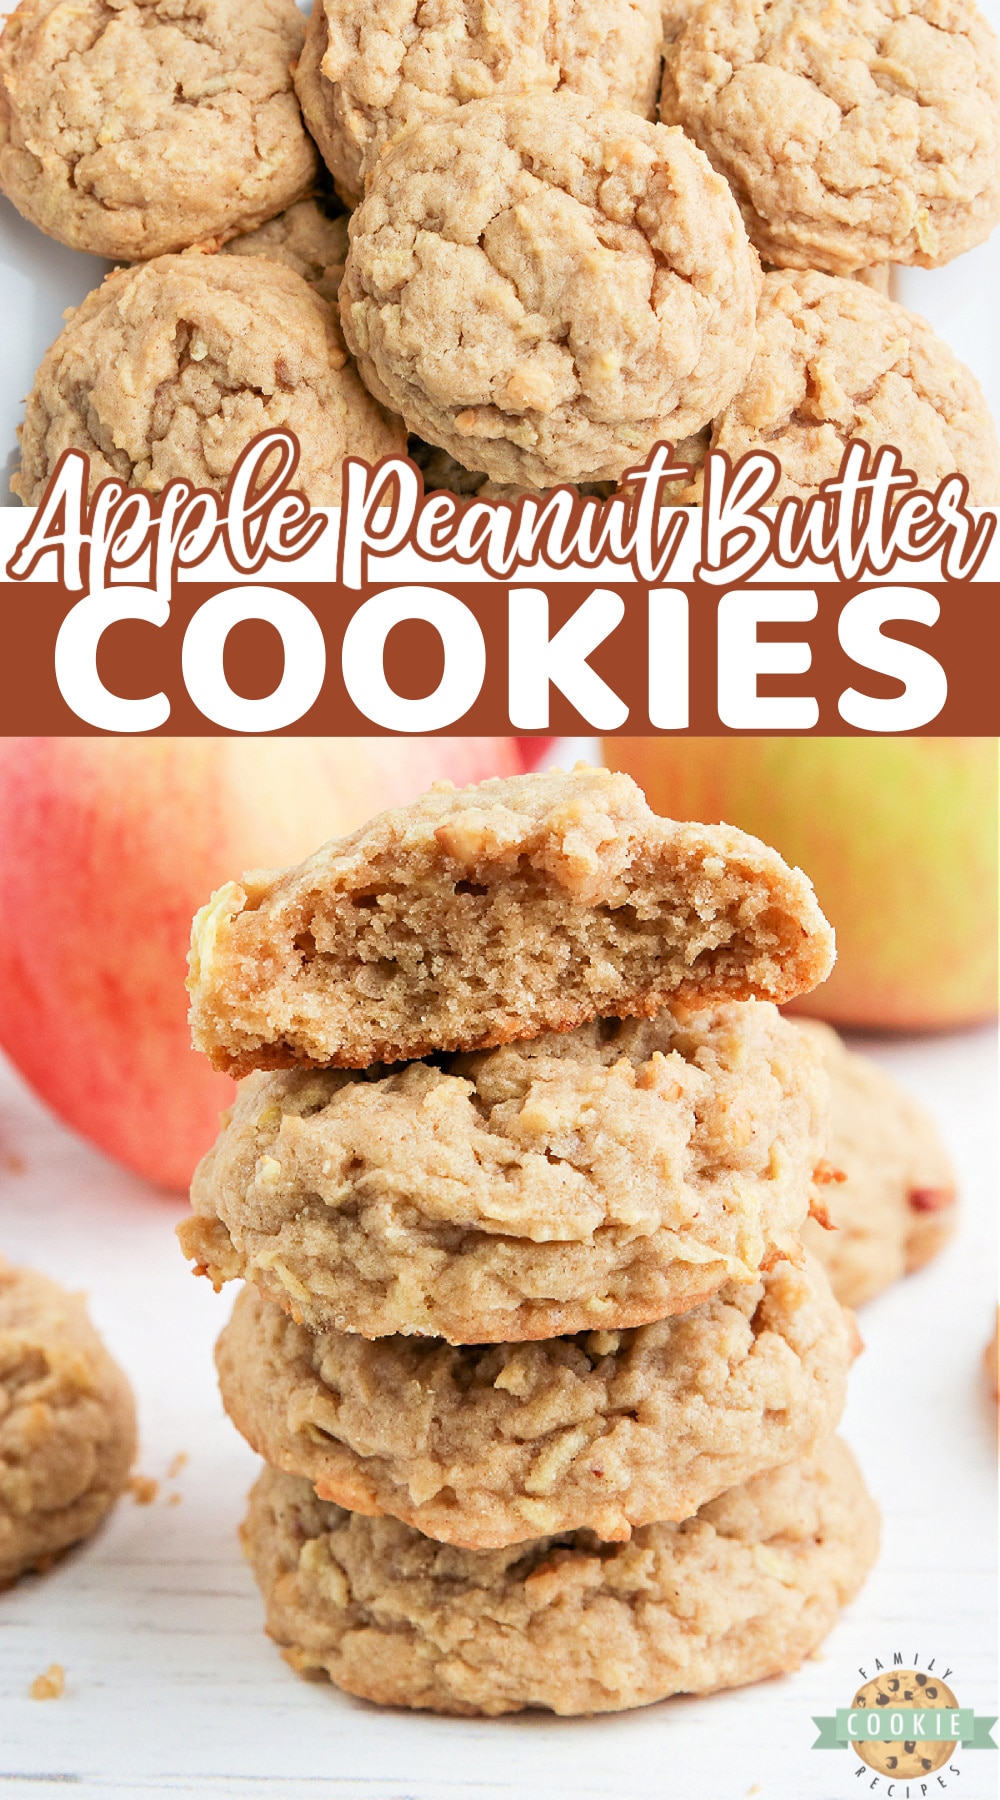 Apple Peanut Butter Cookies that are soft, chewy and packed with freshly grated apple. Delicious peanut butter cookie recipe that is even better with apples in it! via @buttergirls